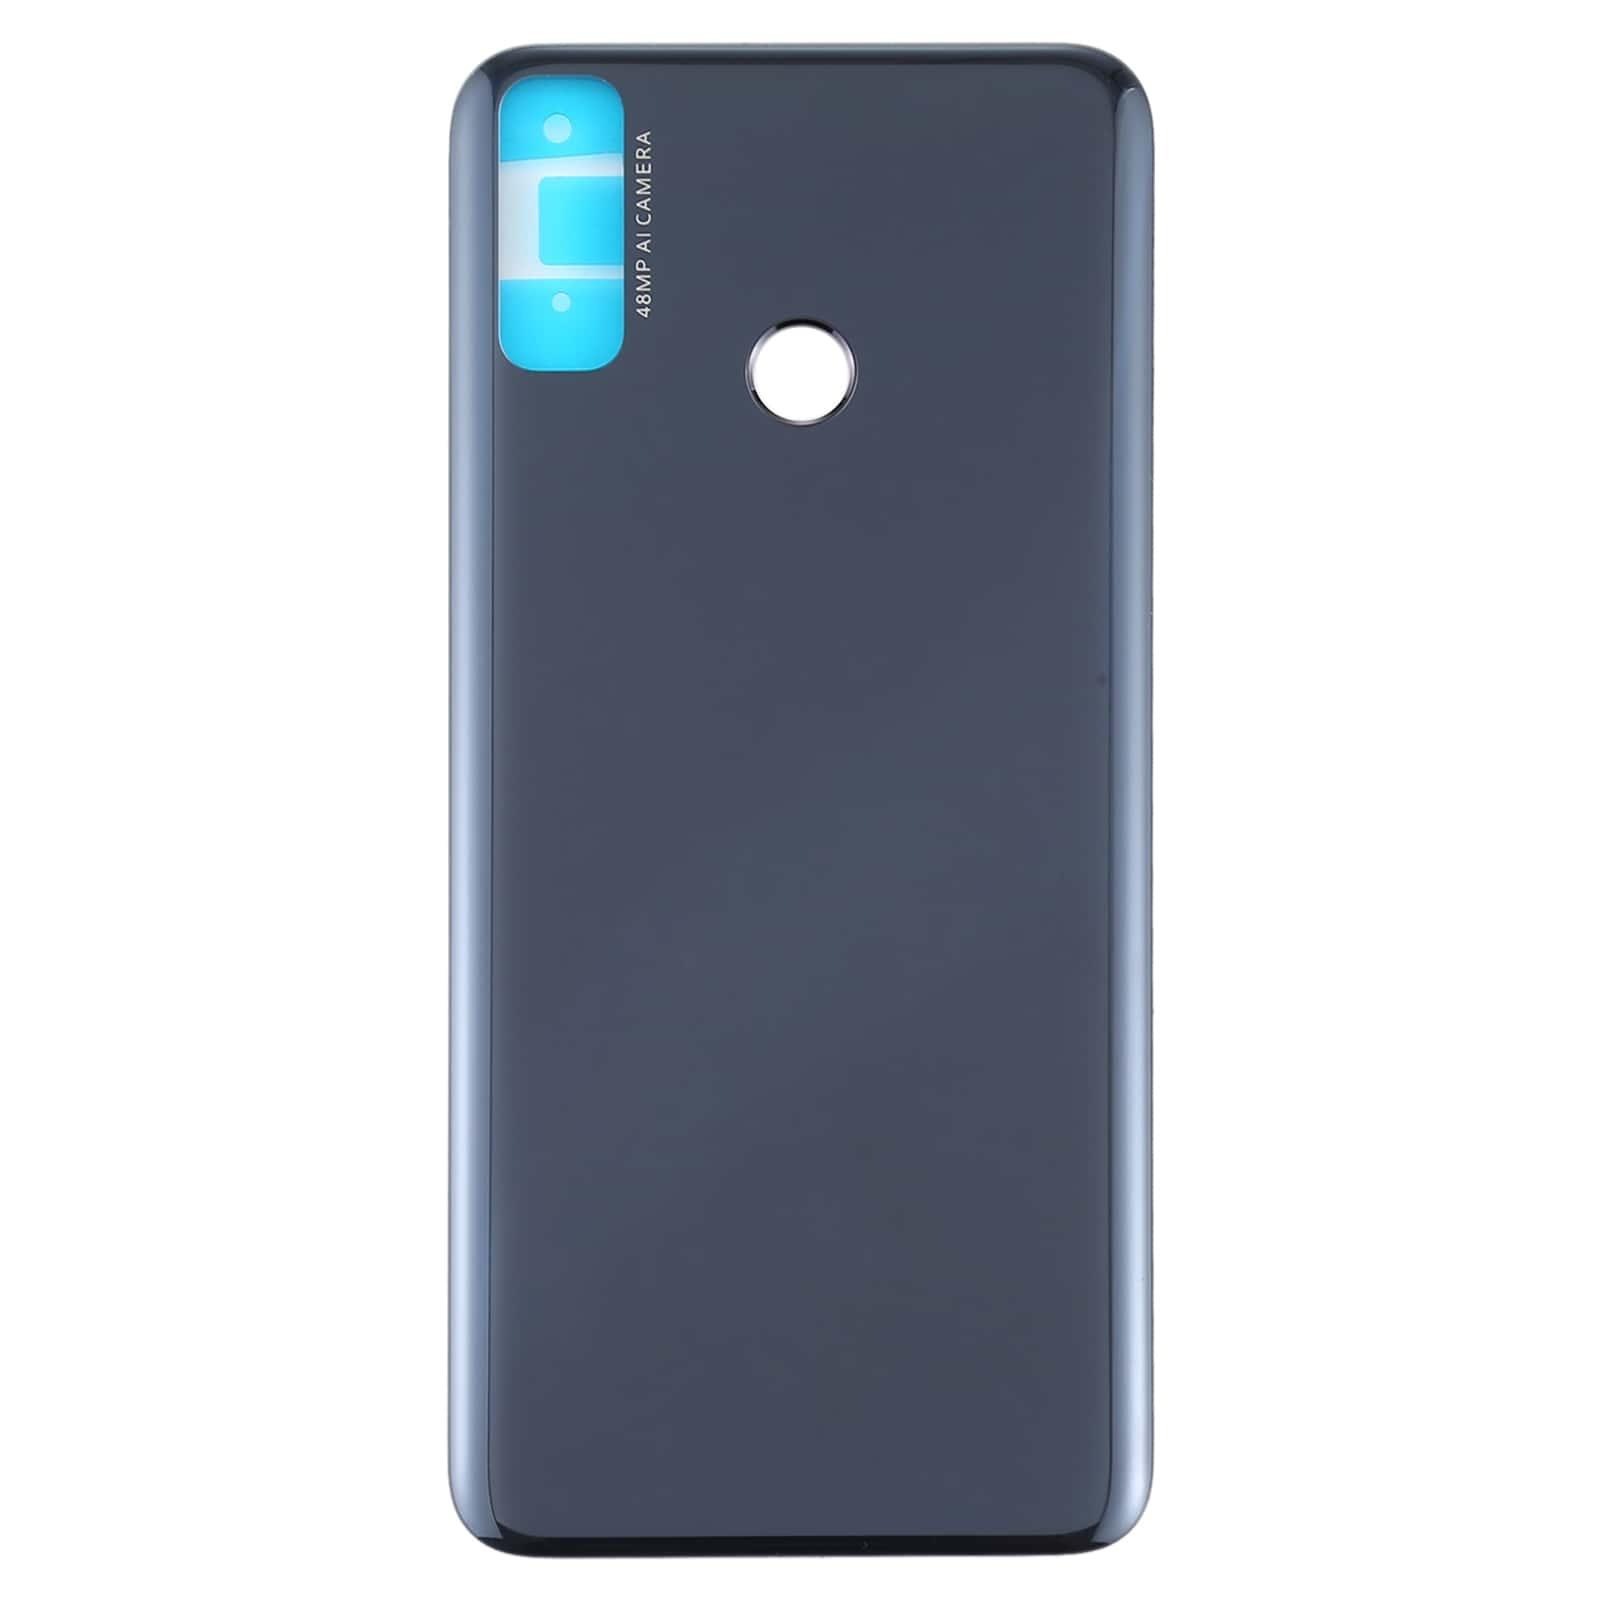 Back Panel Housing Body for Huawei Y8s Black